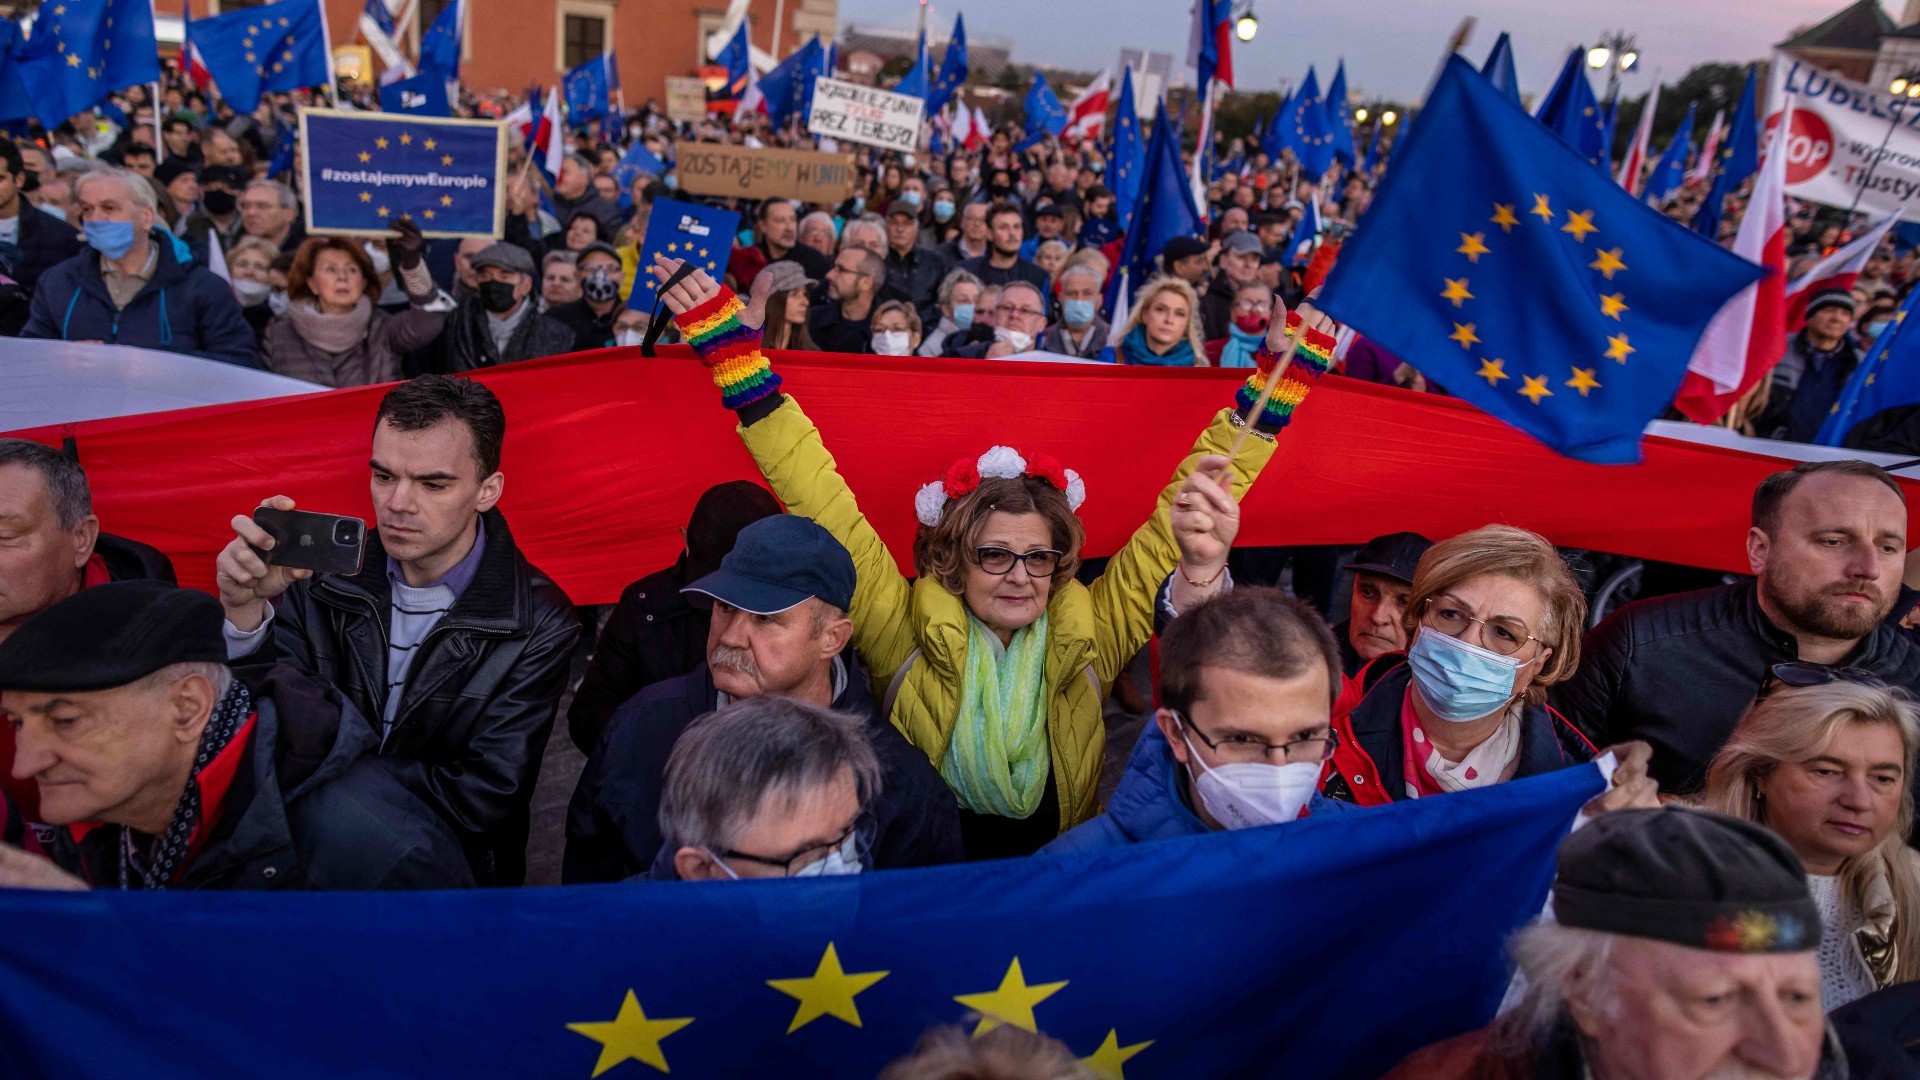 Poland denies it wants to leave the EU after protests